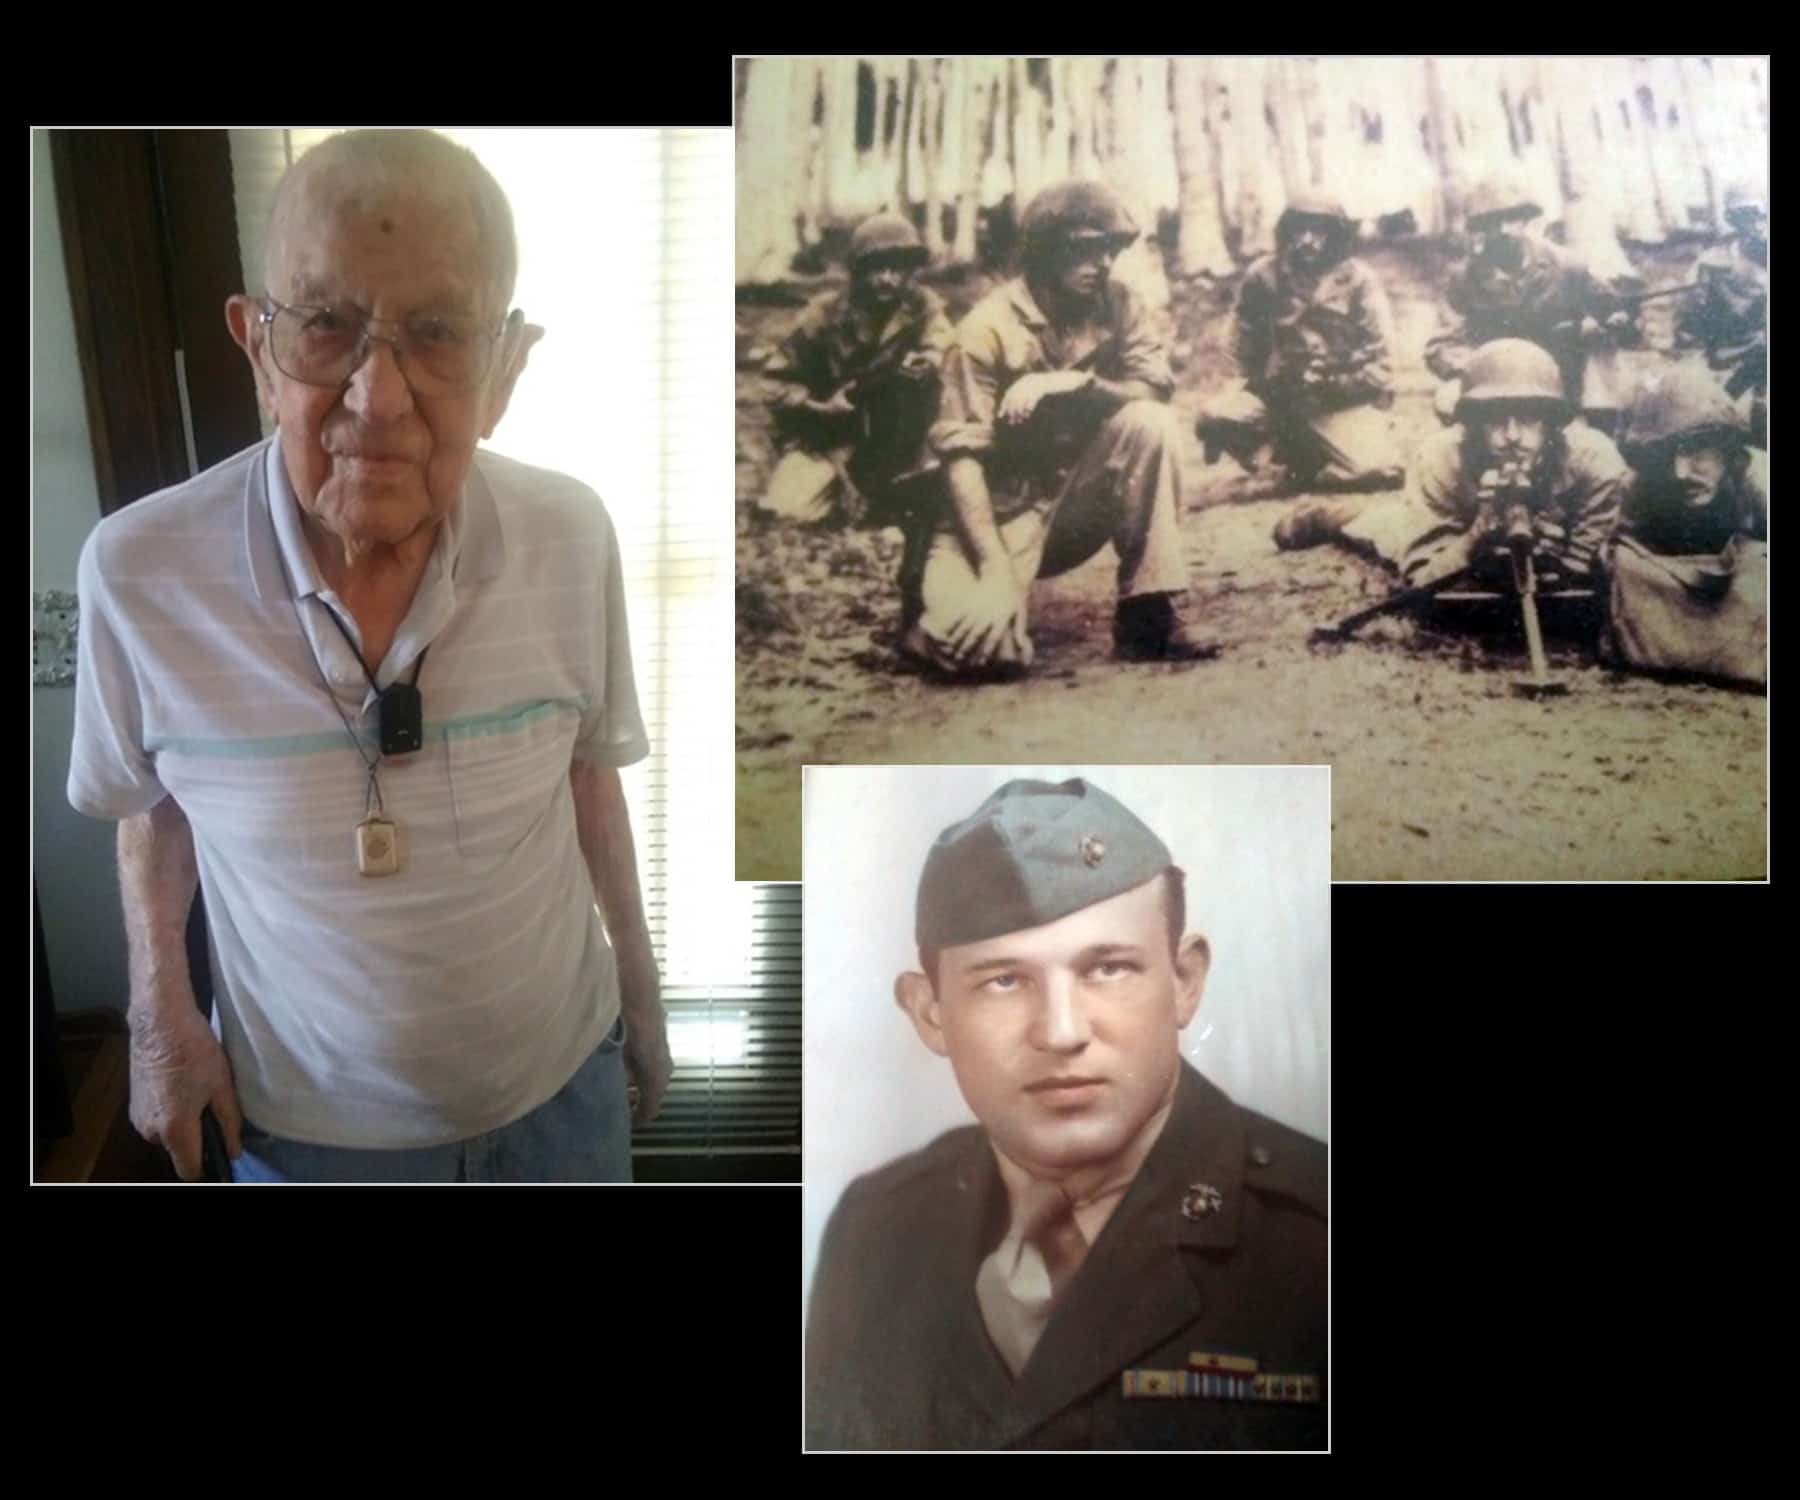 An elderly man poses with his old printed photos from his time in the military.